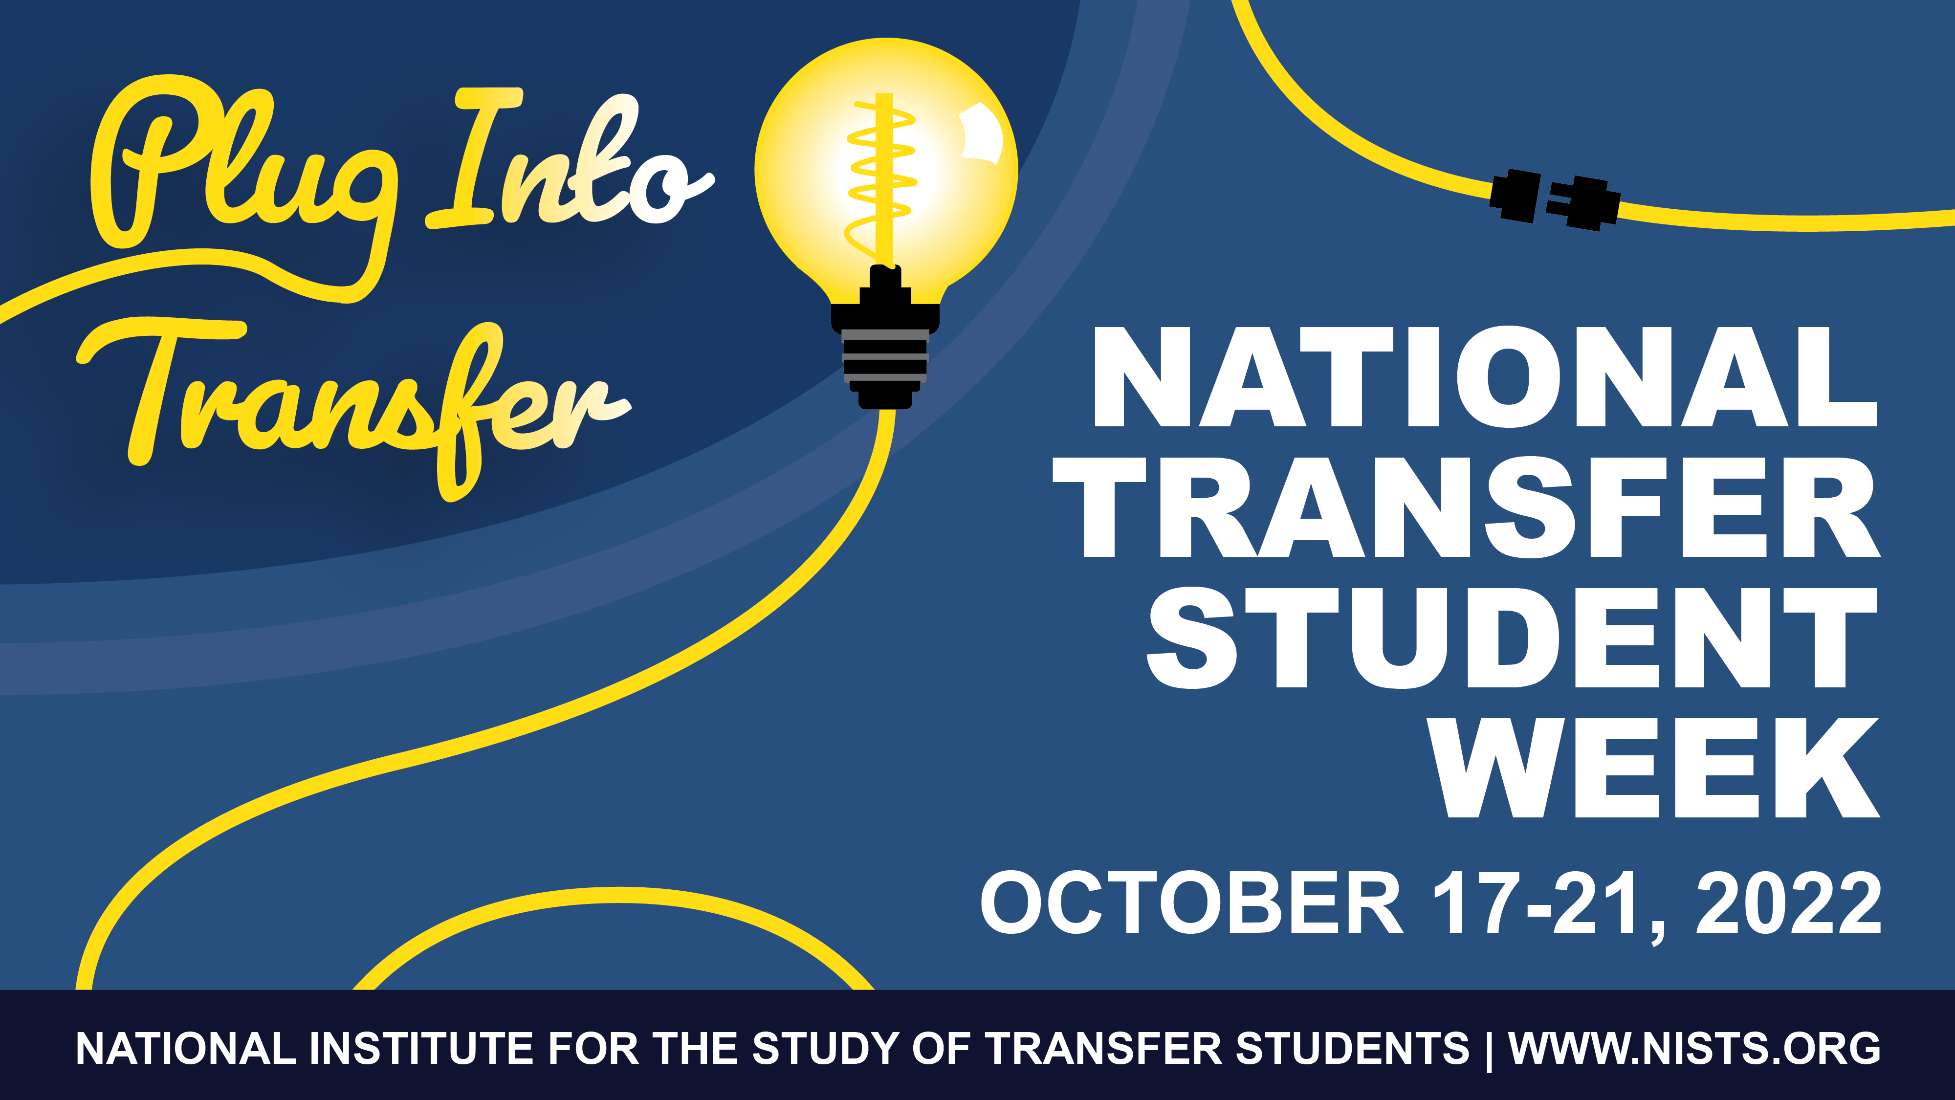 Plug Into Transfer! National Transfer Student Week is October 17-21, 2022. The National Institute for the Study of Transfer Students website is www.nists.org